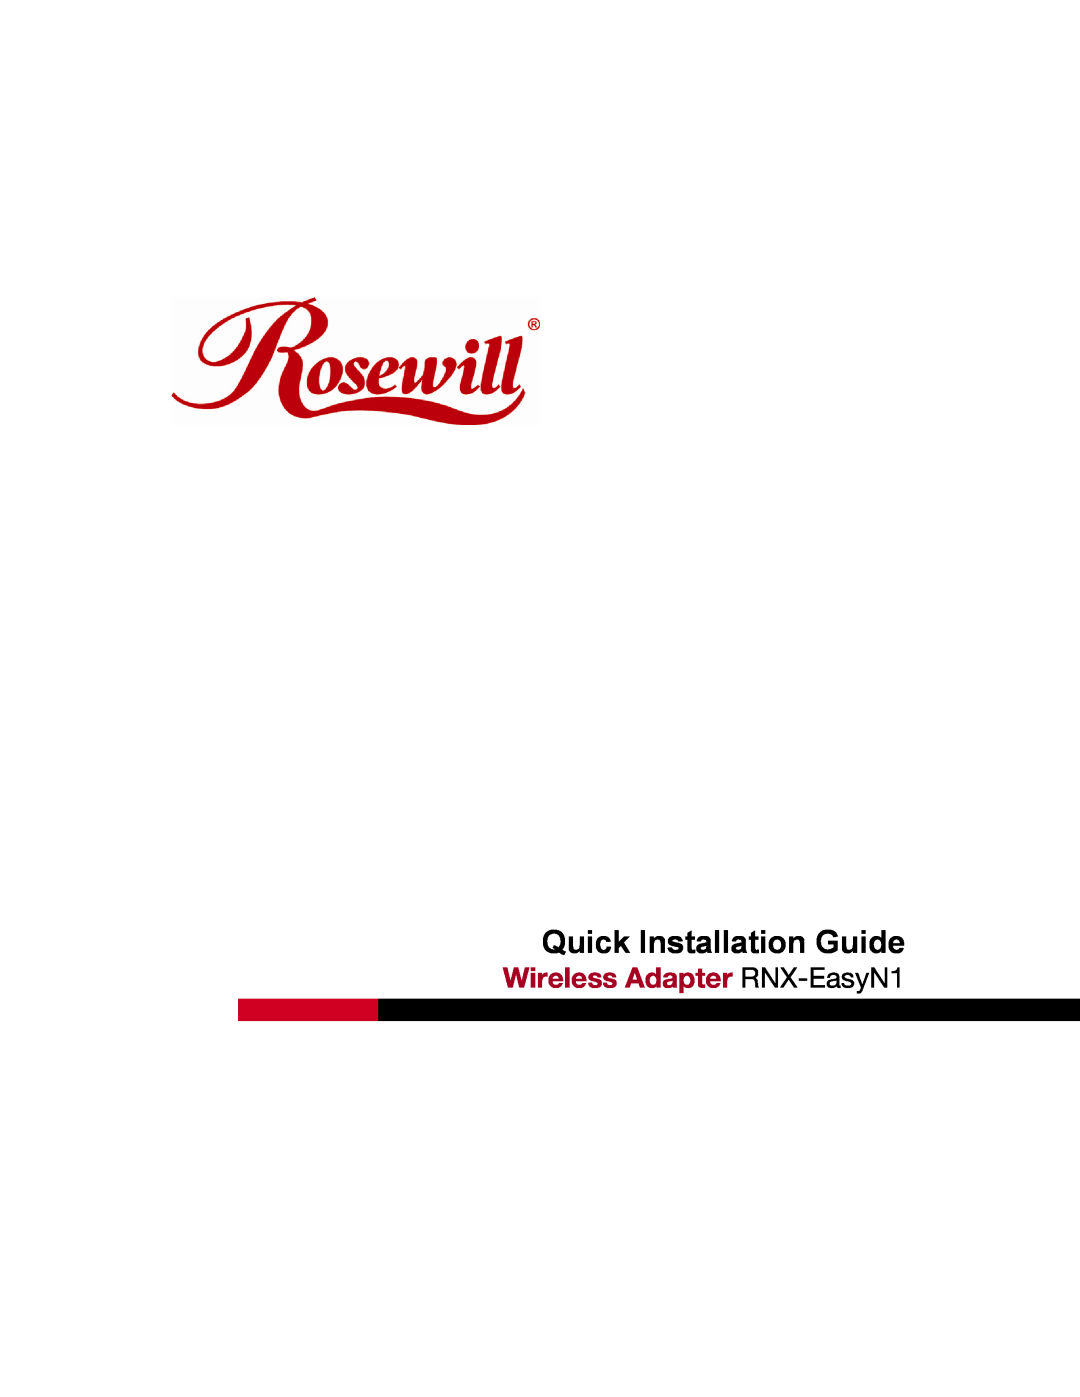 Rosewill manual Quick Installation Guide, Wireless Adapter RNX-EasyN1 